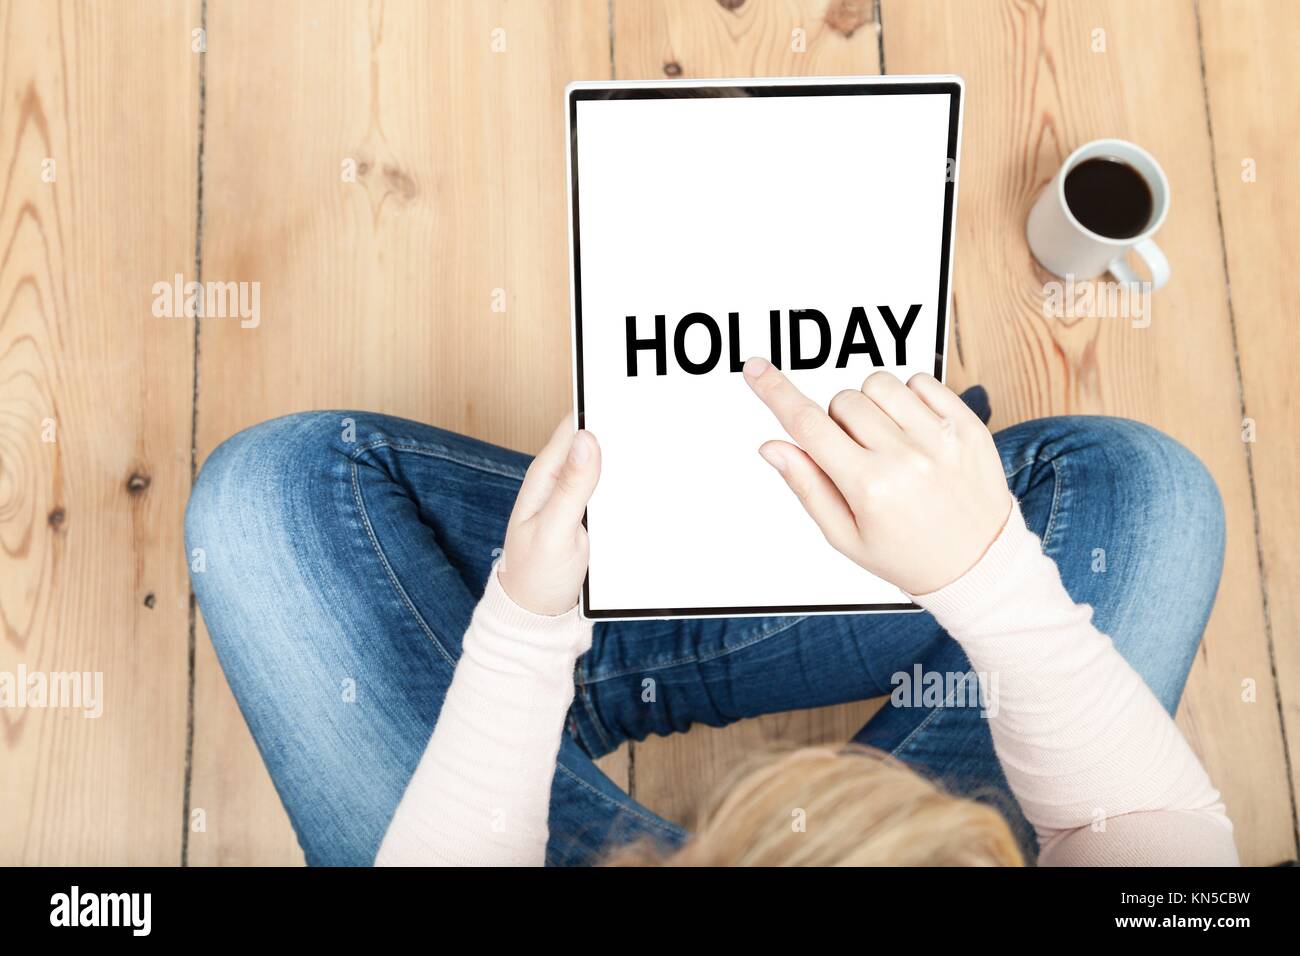 choose holiday on a tablet. Stock Photo